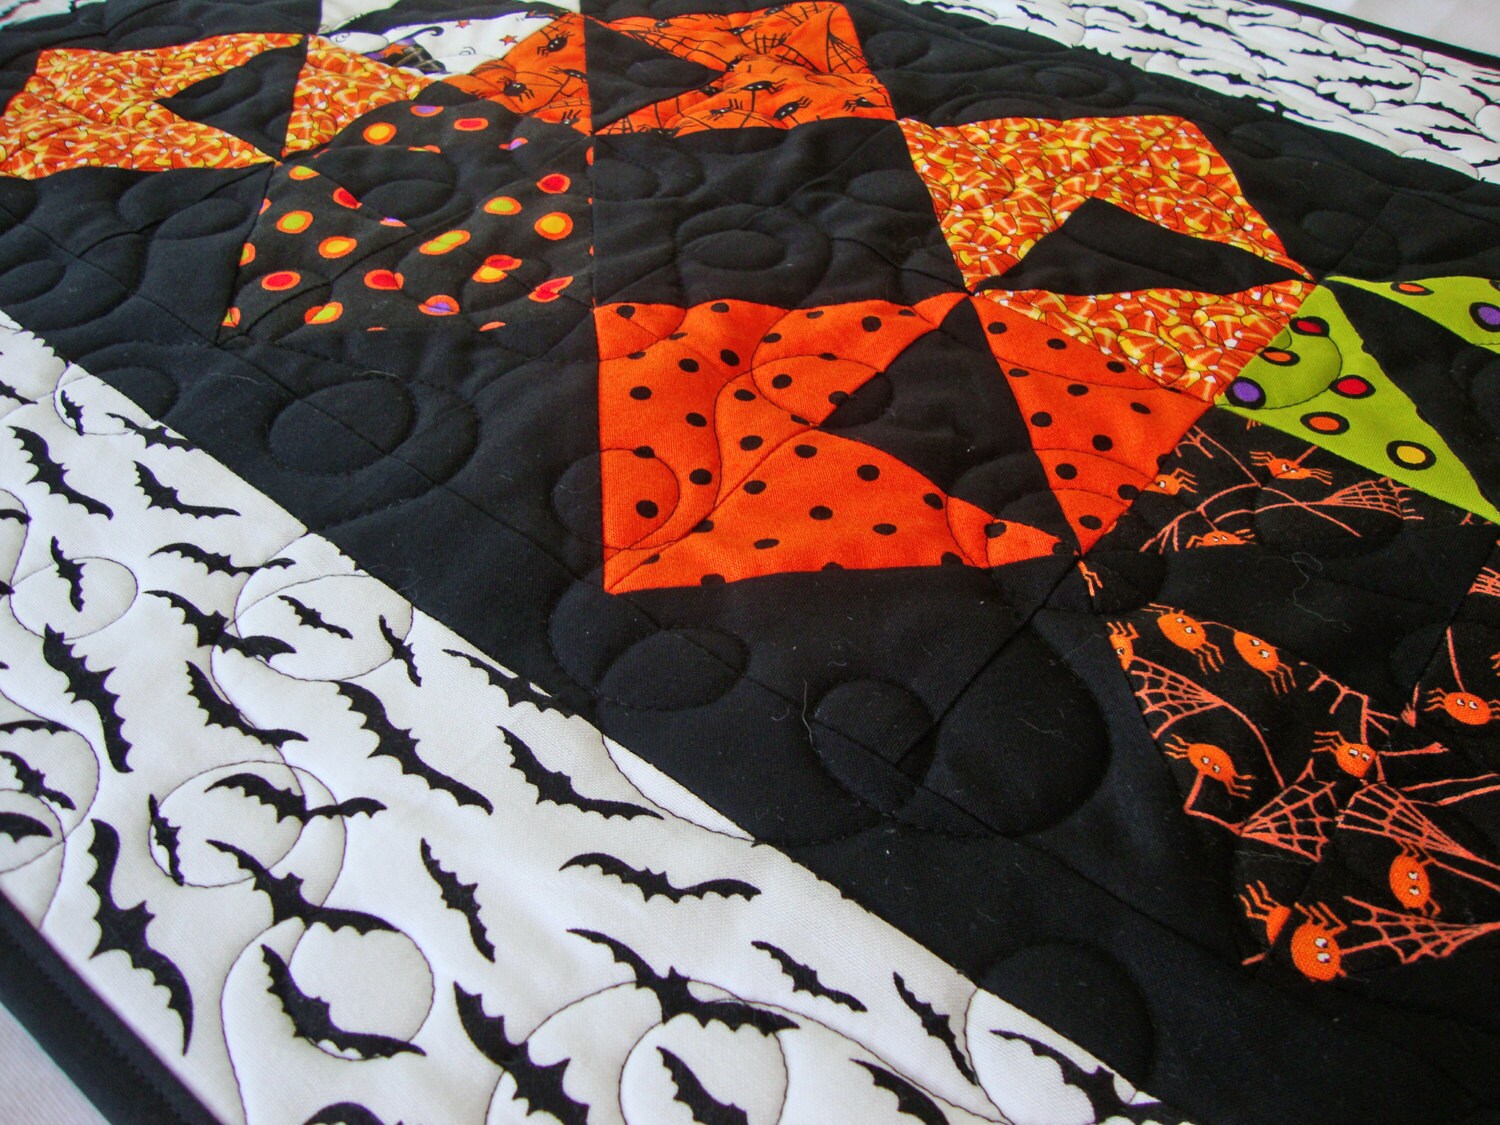 Halloween Bats Quilted Table Runner, 18.75" x 38.5", Quilted Table Topper Runner, Halloween Decor, Trick or Treat, Deb Strain